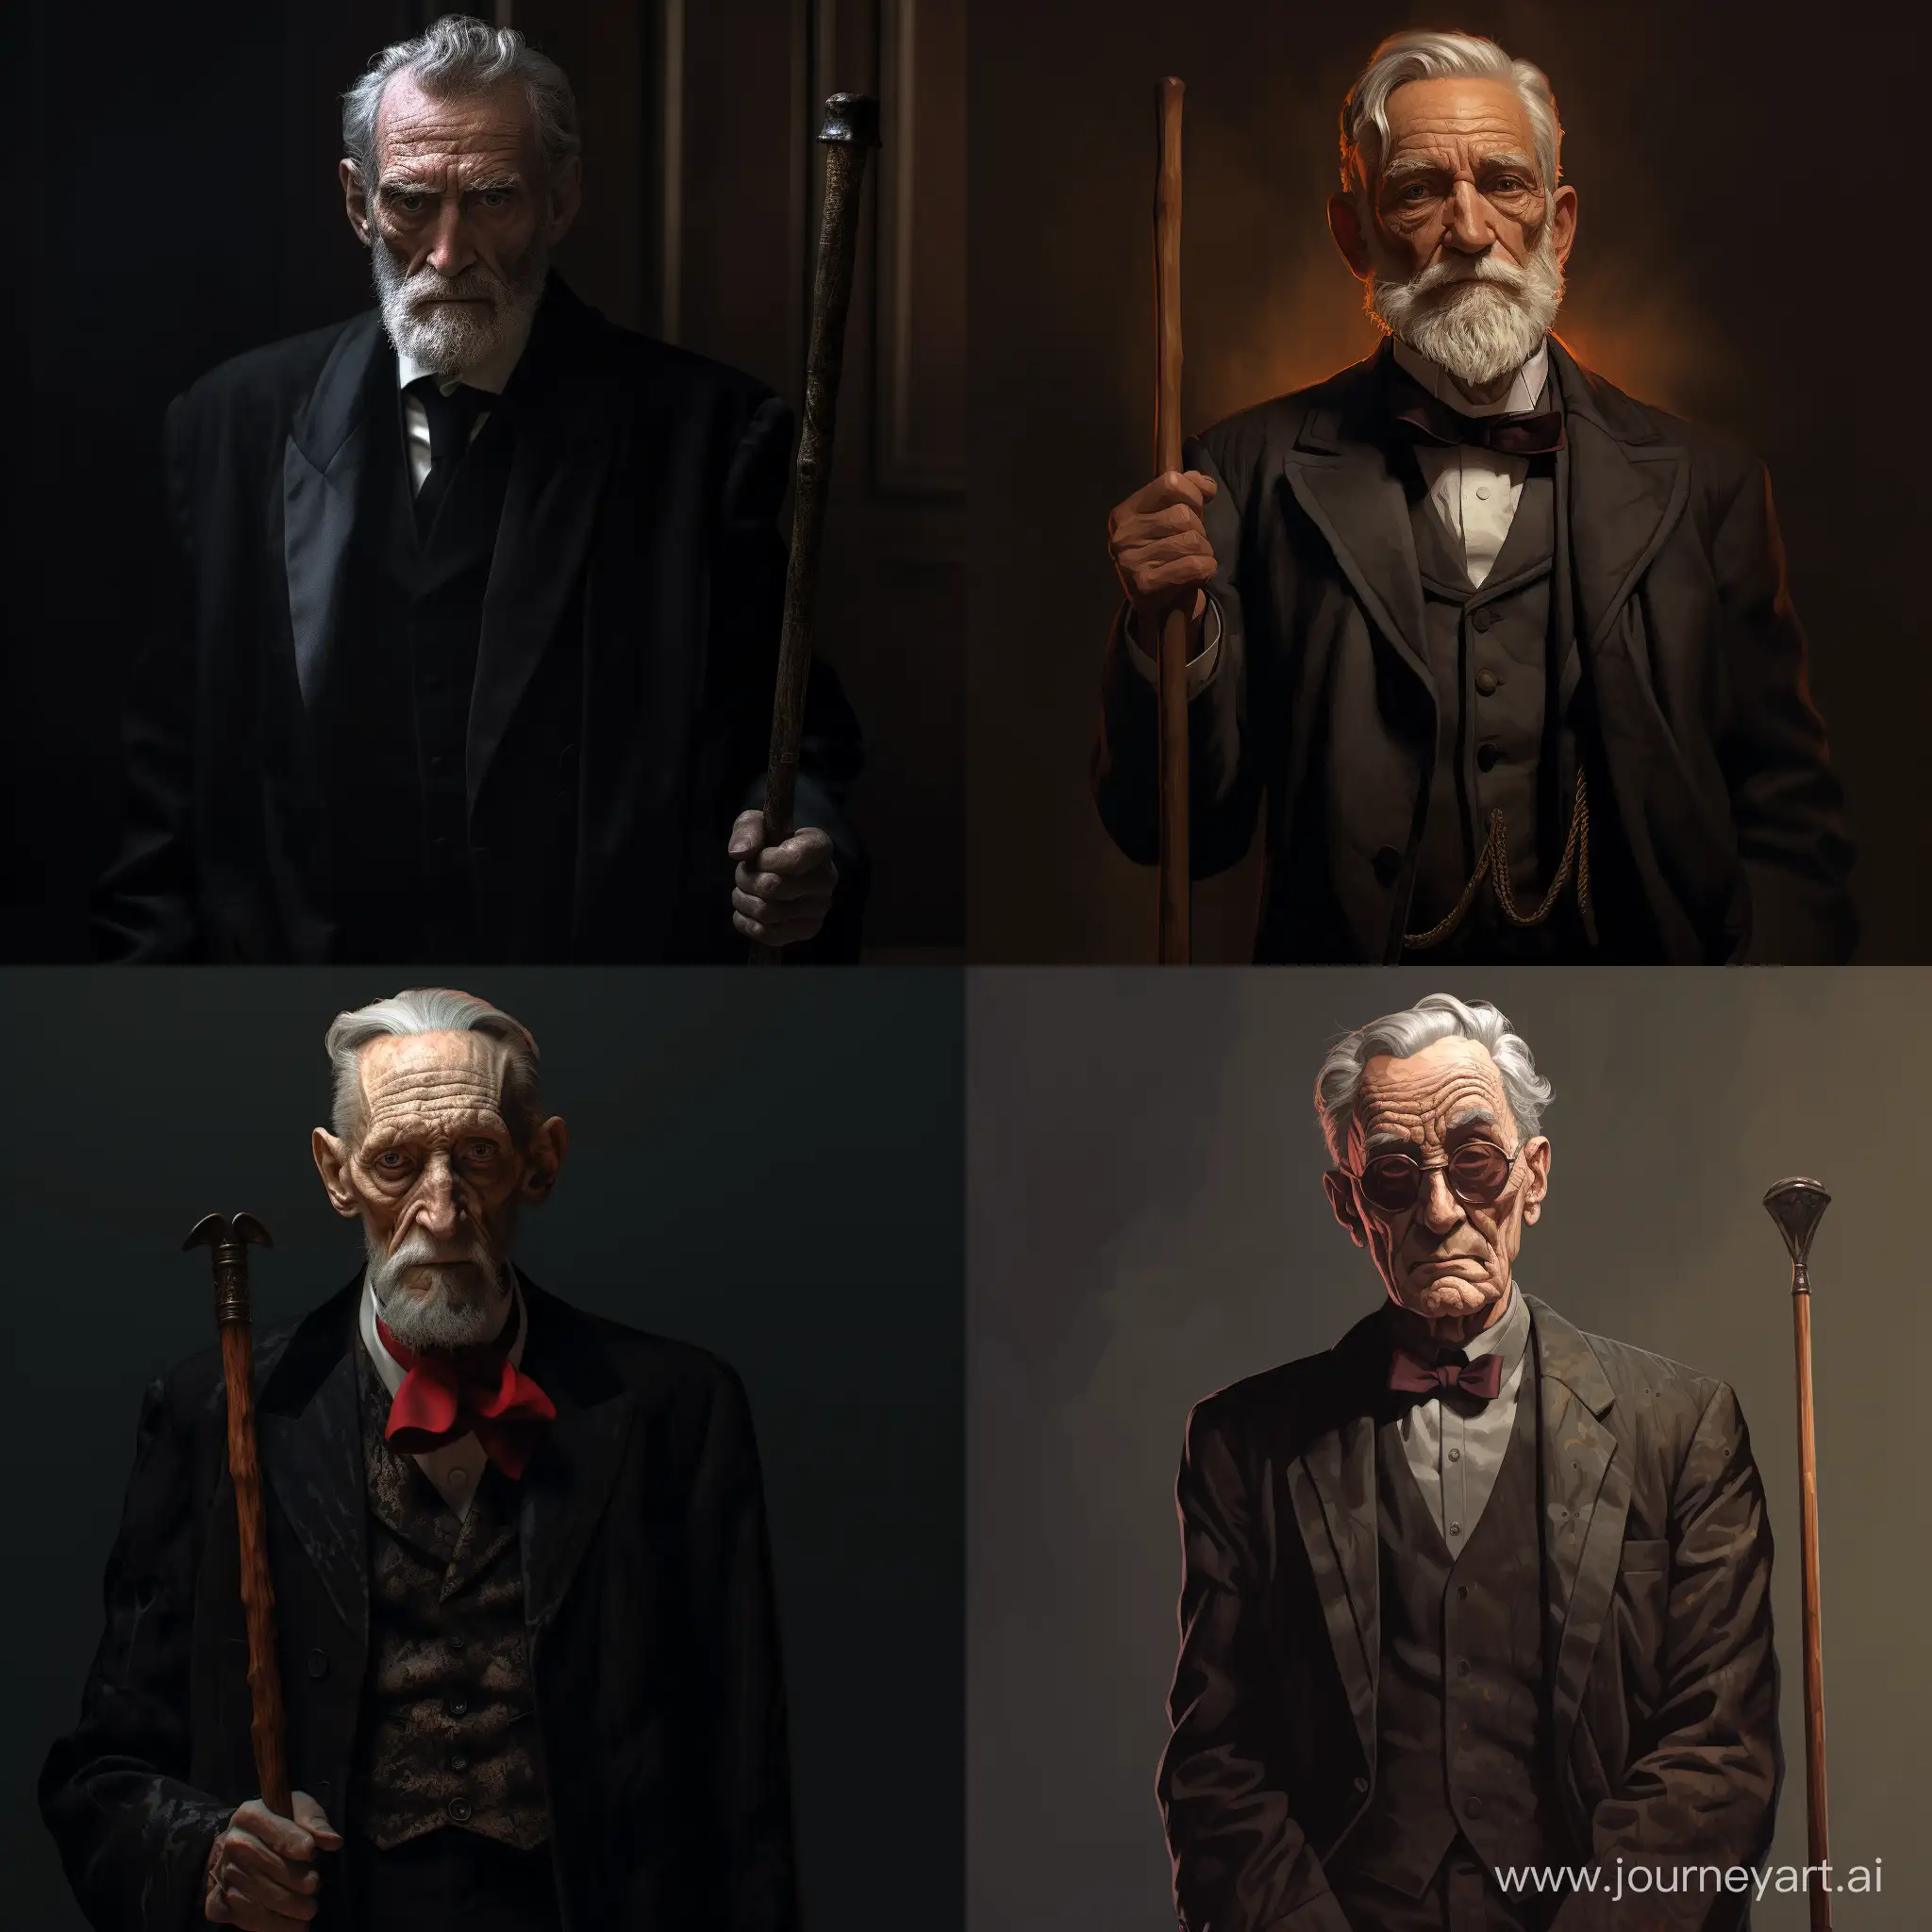 Mysterious-Villain-in-Black-Stoic-Old-Man-with-a-Cane